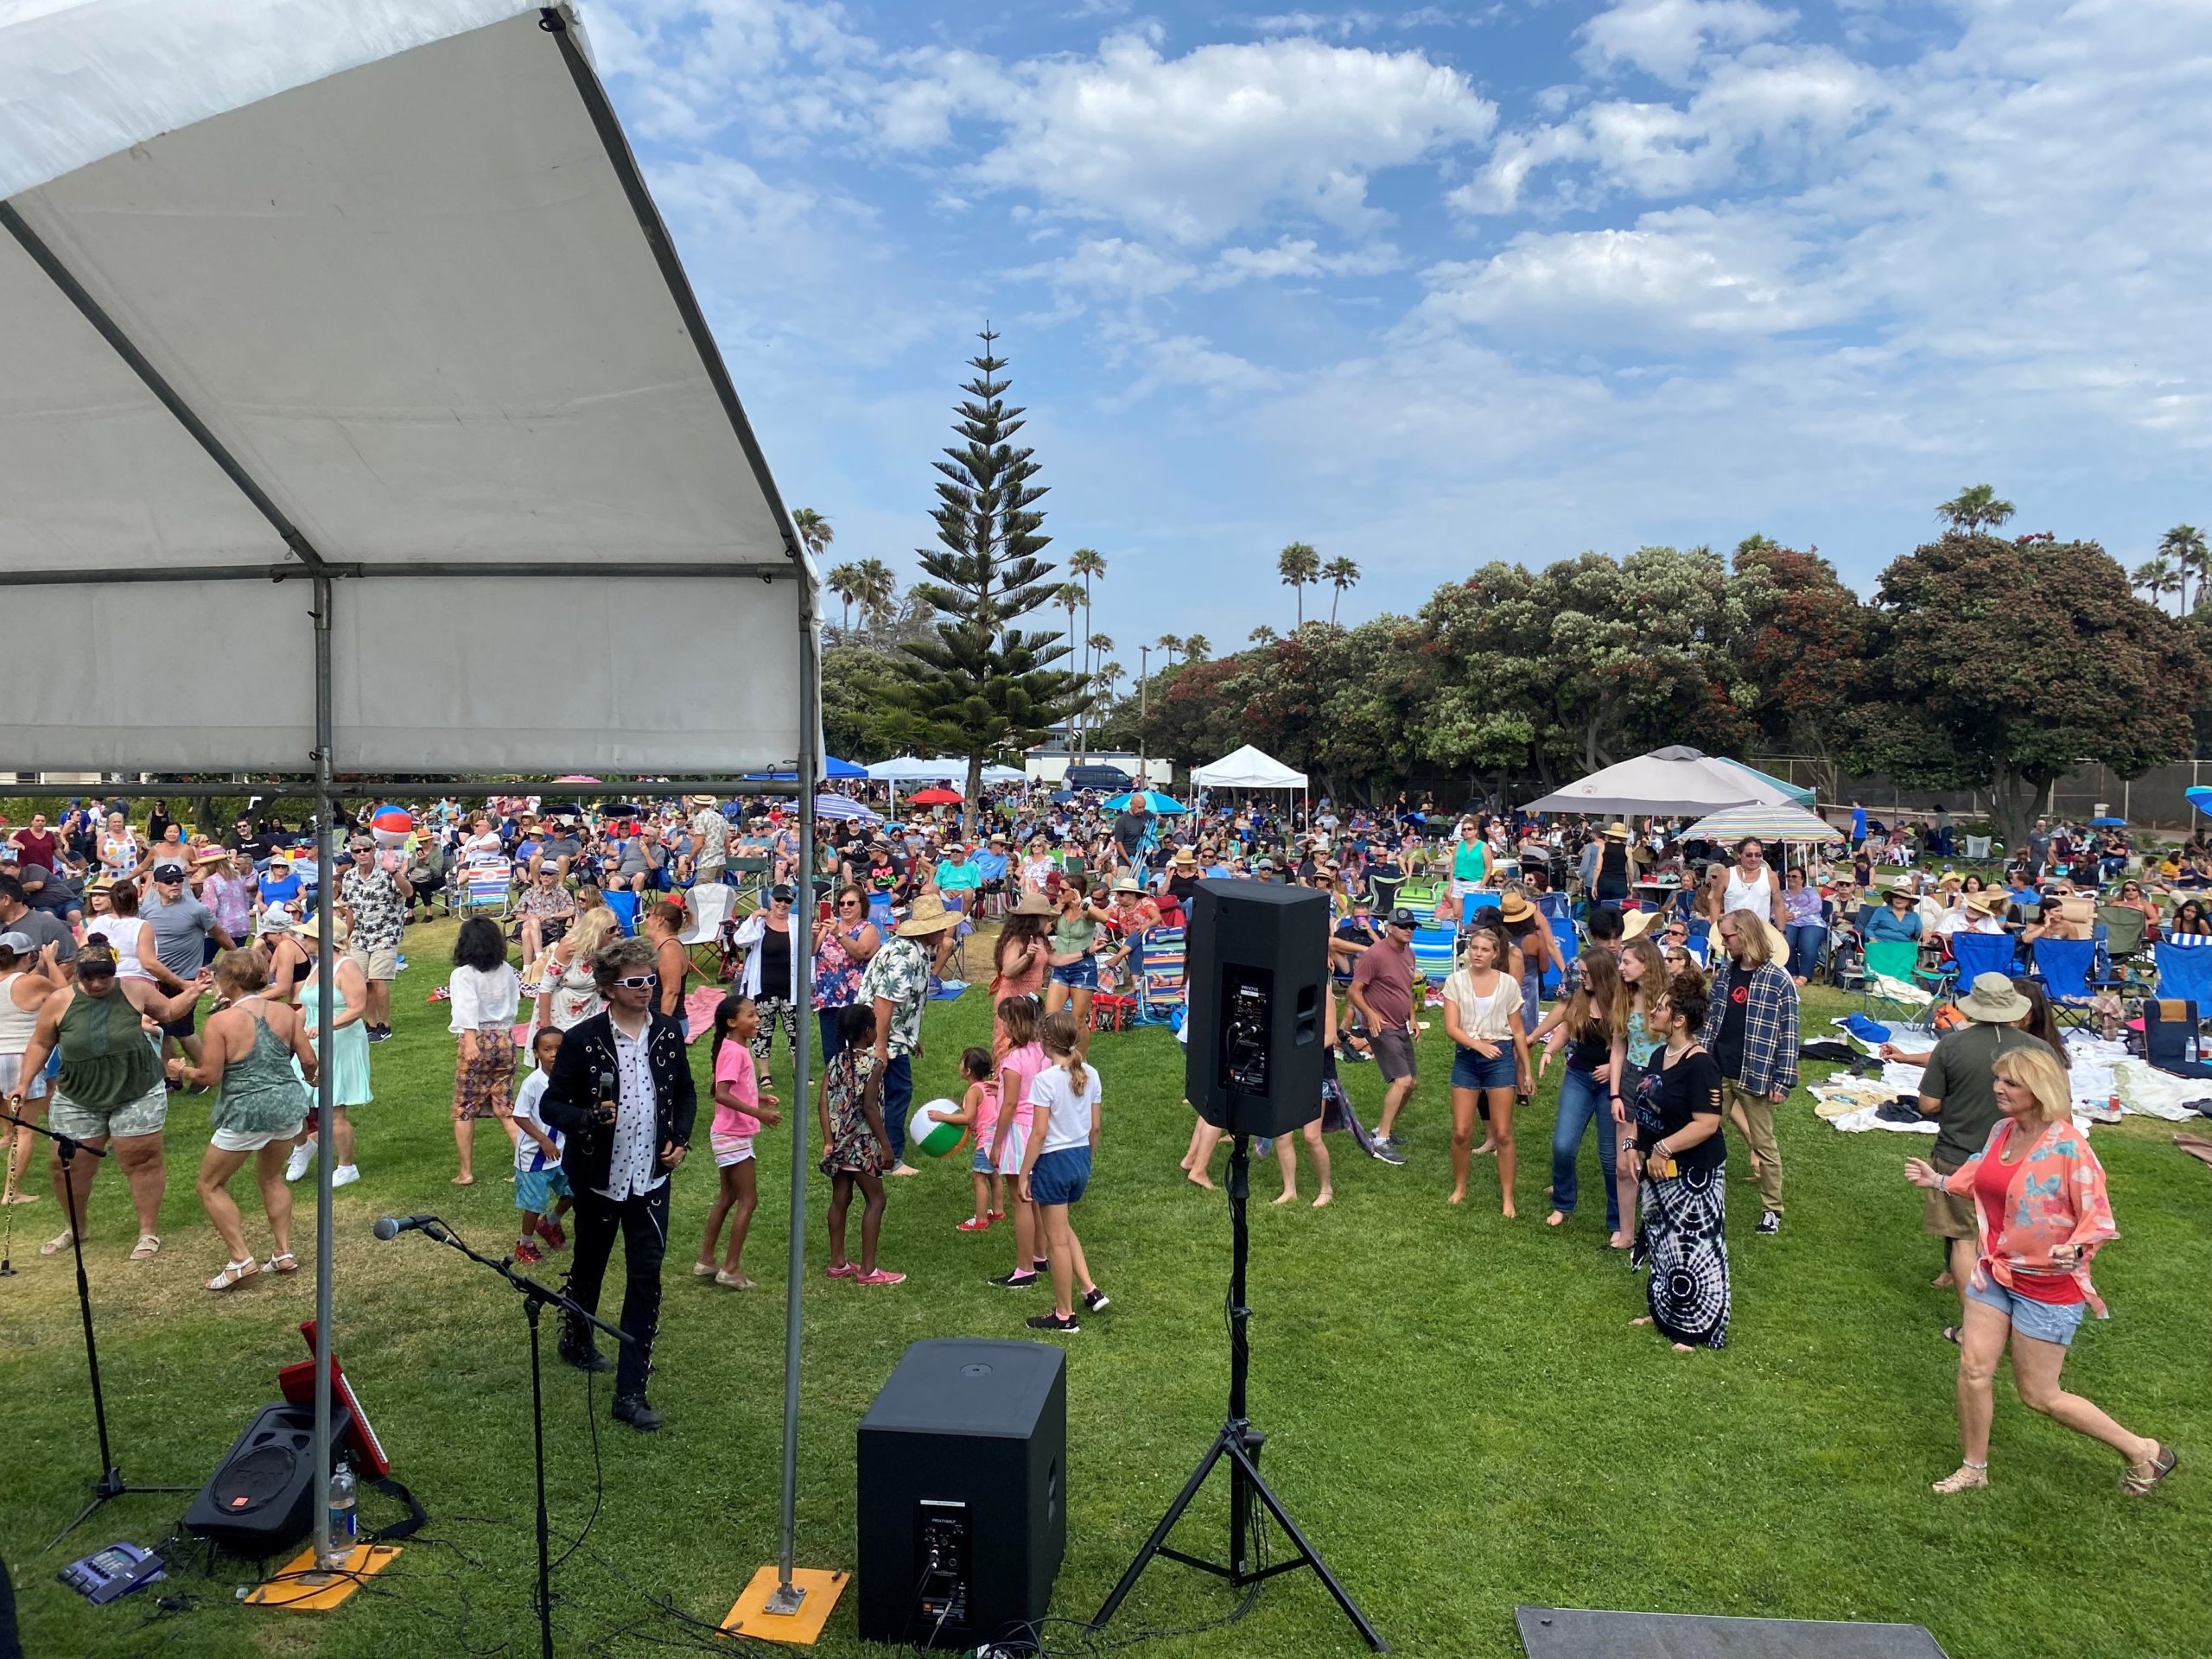 2022 Concerts by the Sea Summer Series to Be Relocated to Harbor View